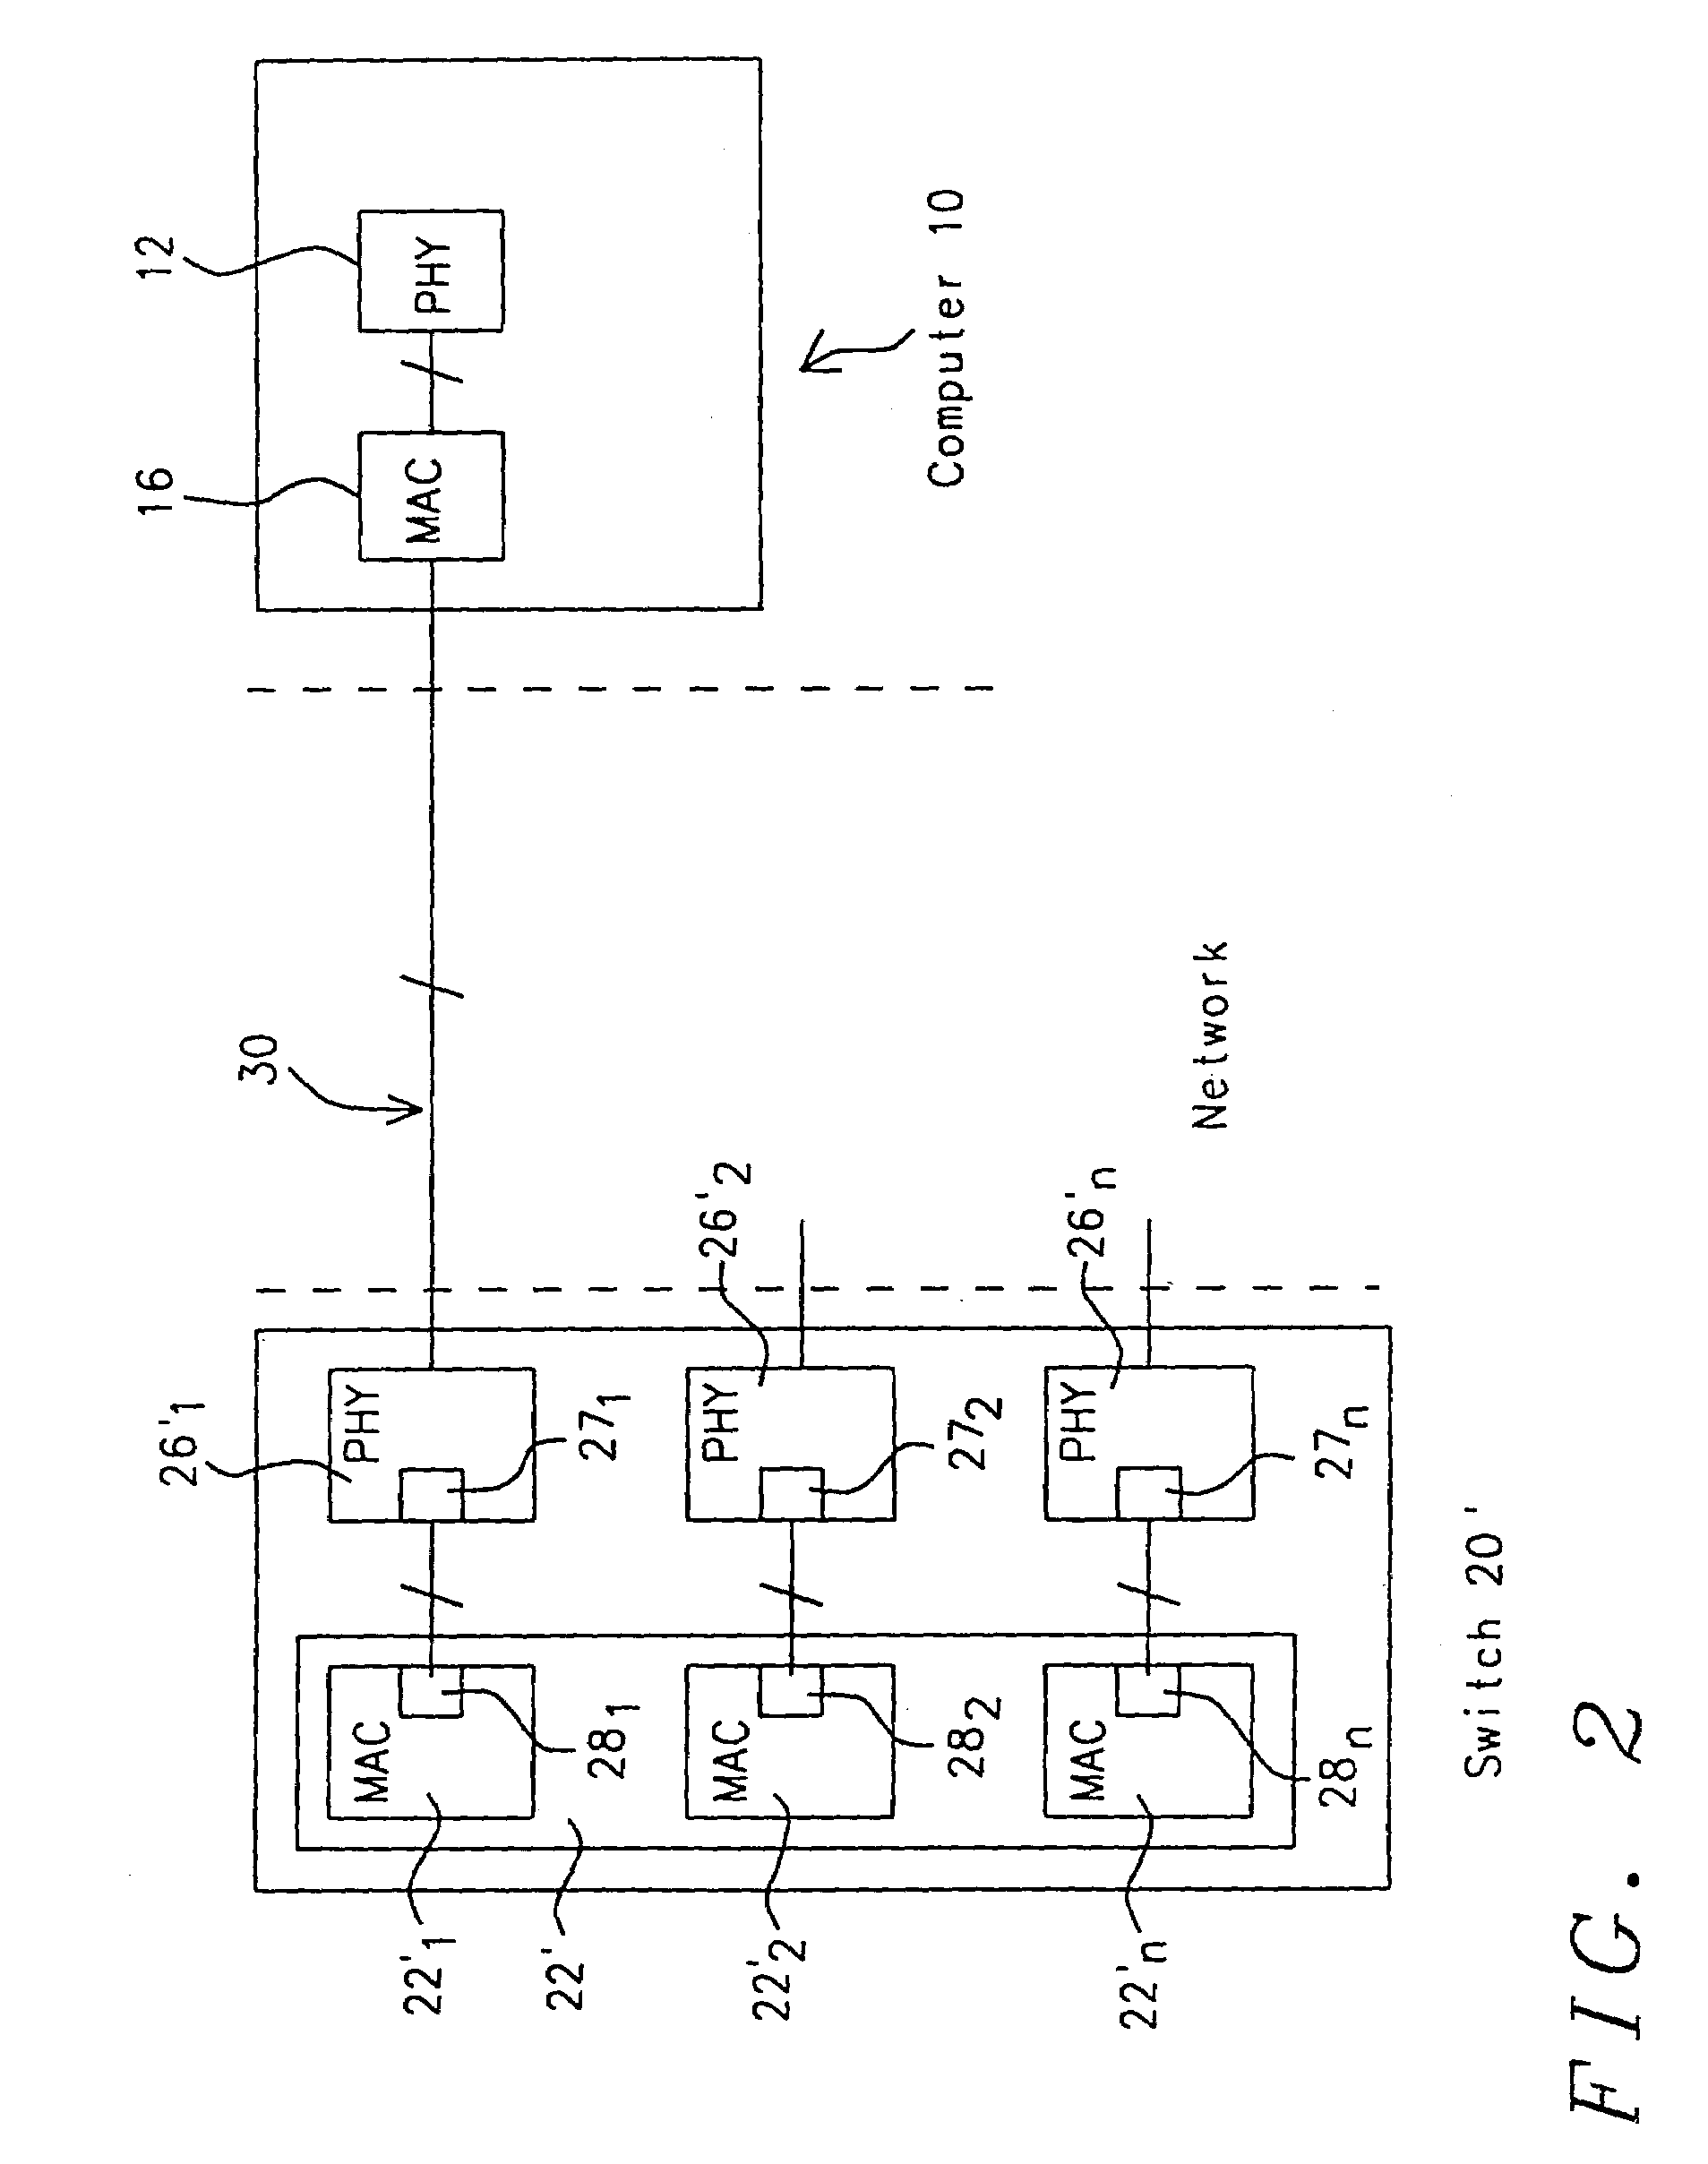 Chip-to-chip interface for 1000 base T gigabit physical layer device